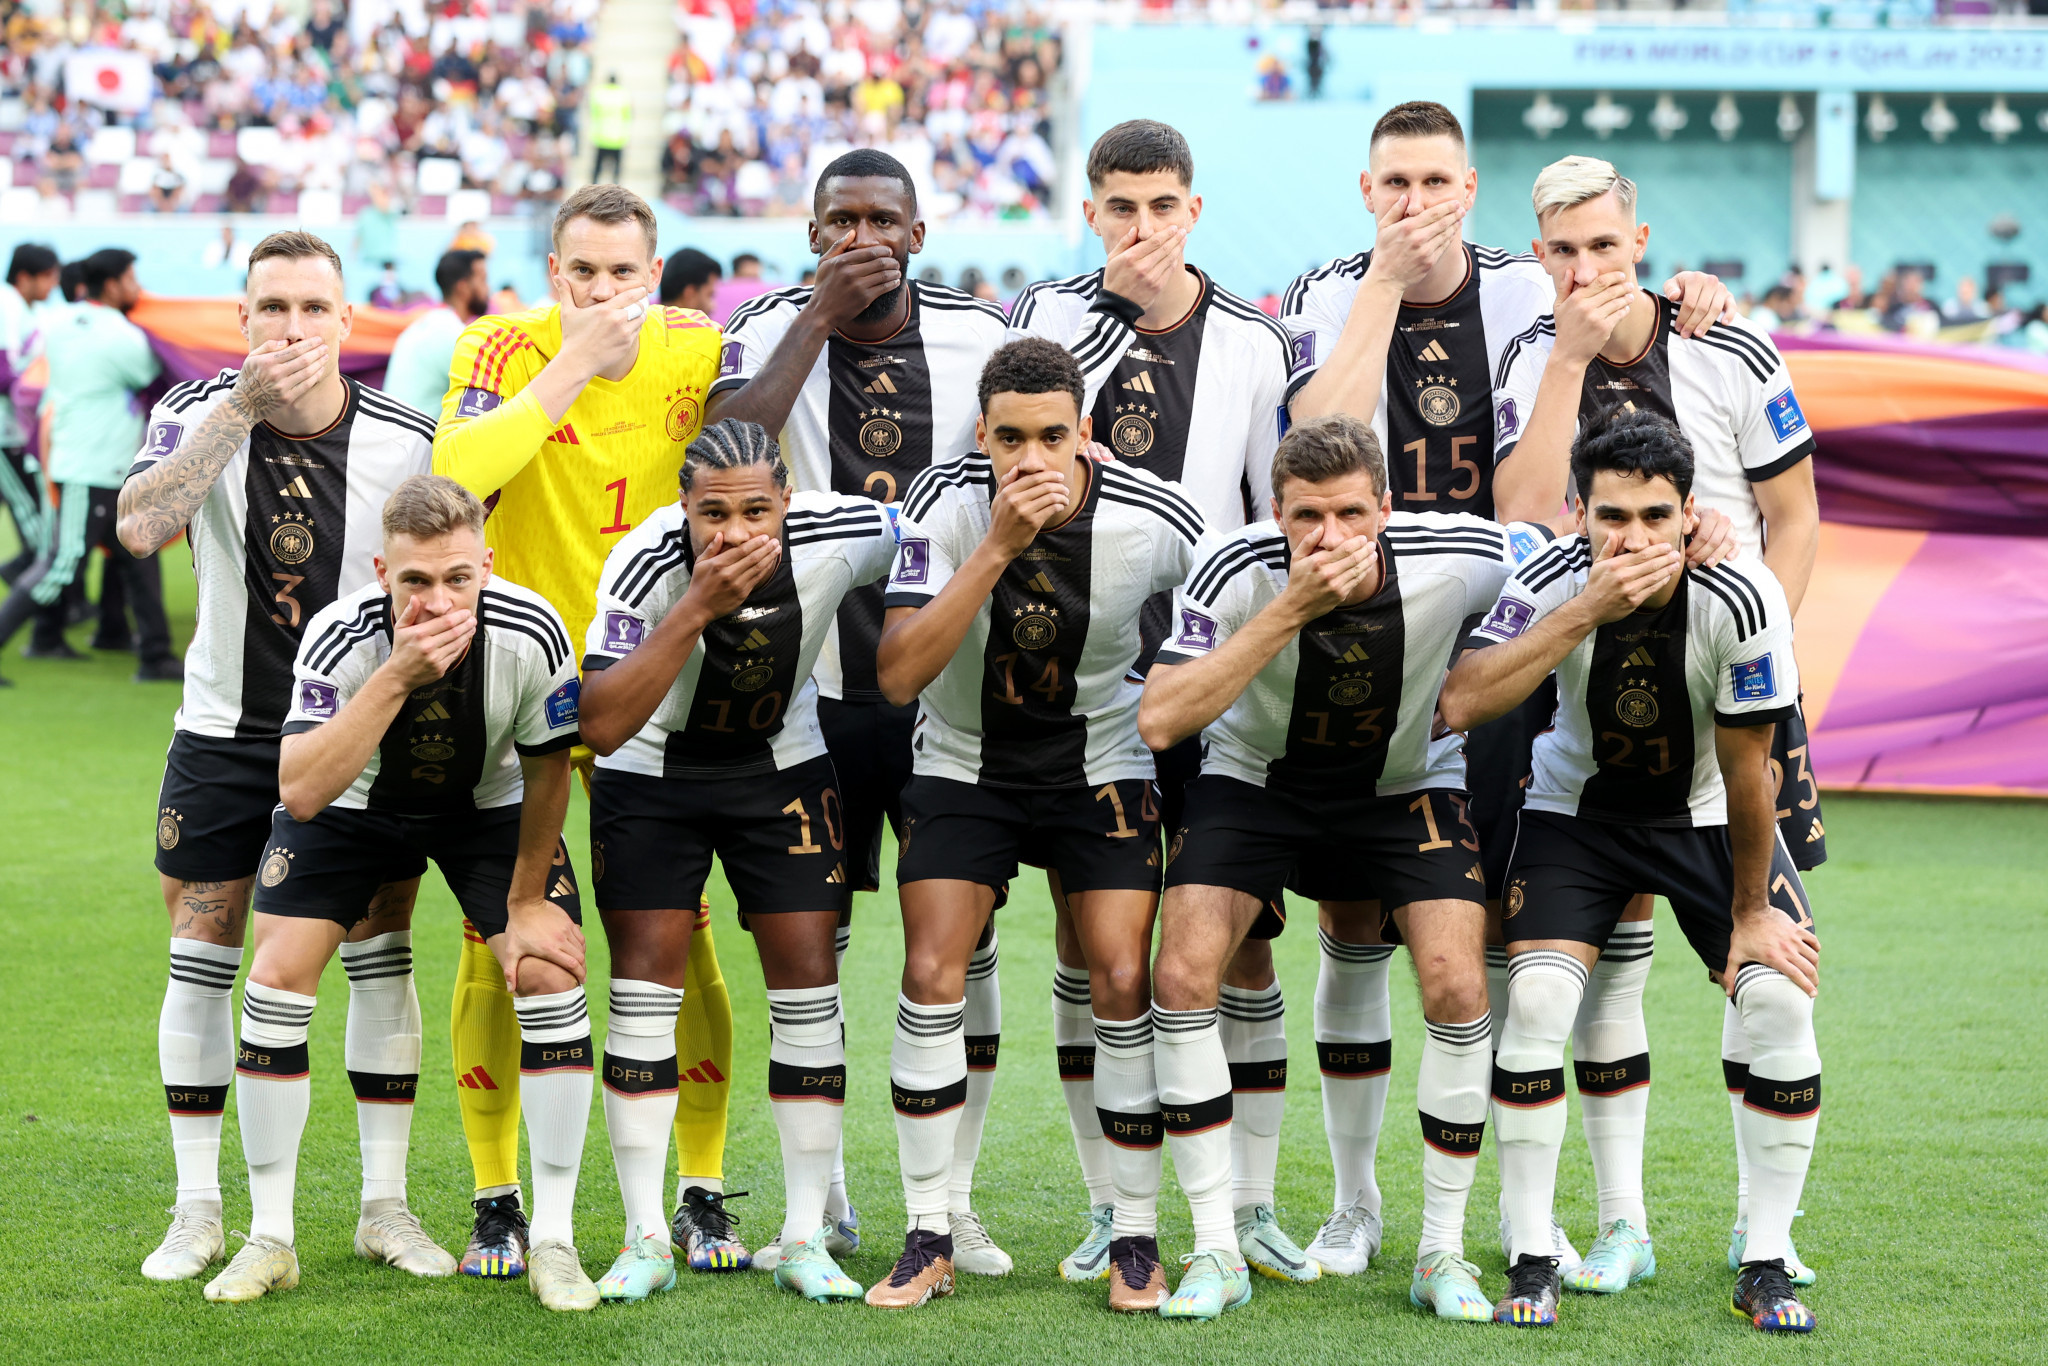 German players cover mouths in protest against FIFA's "OneLove" armband policy before shock loss against Japan